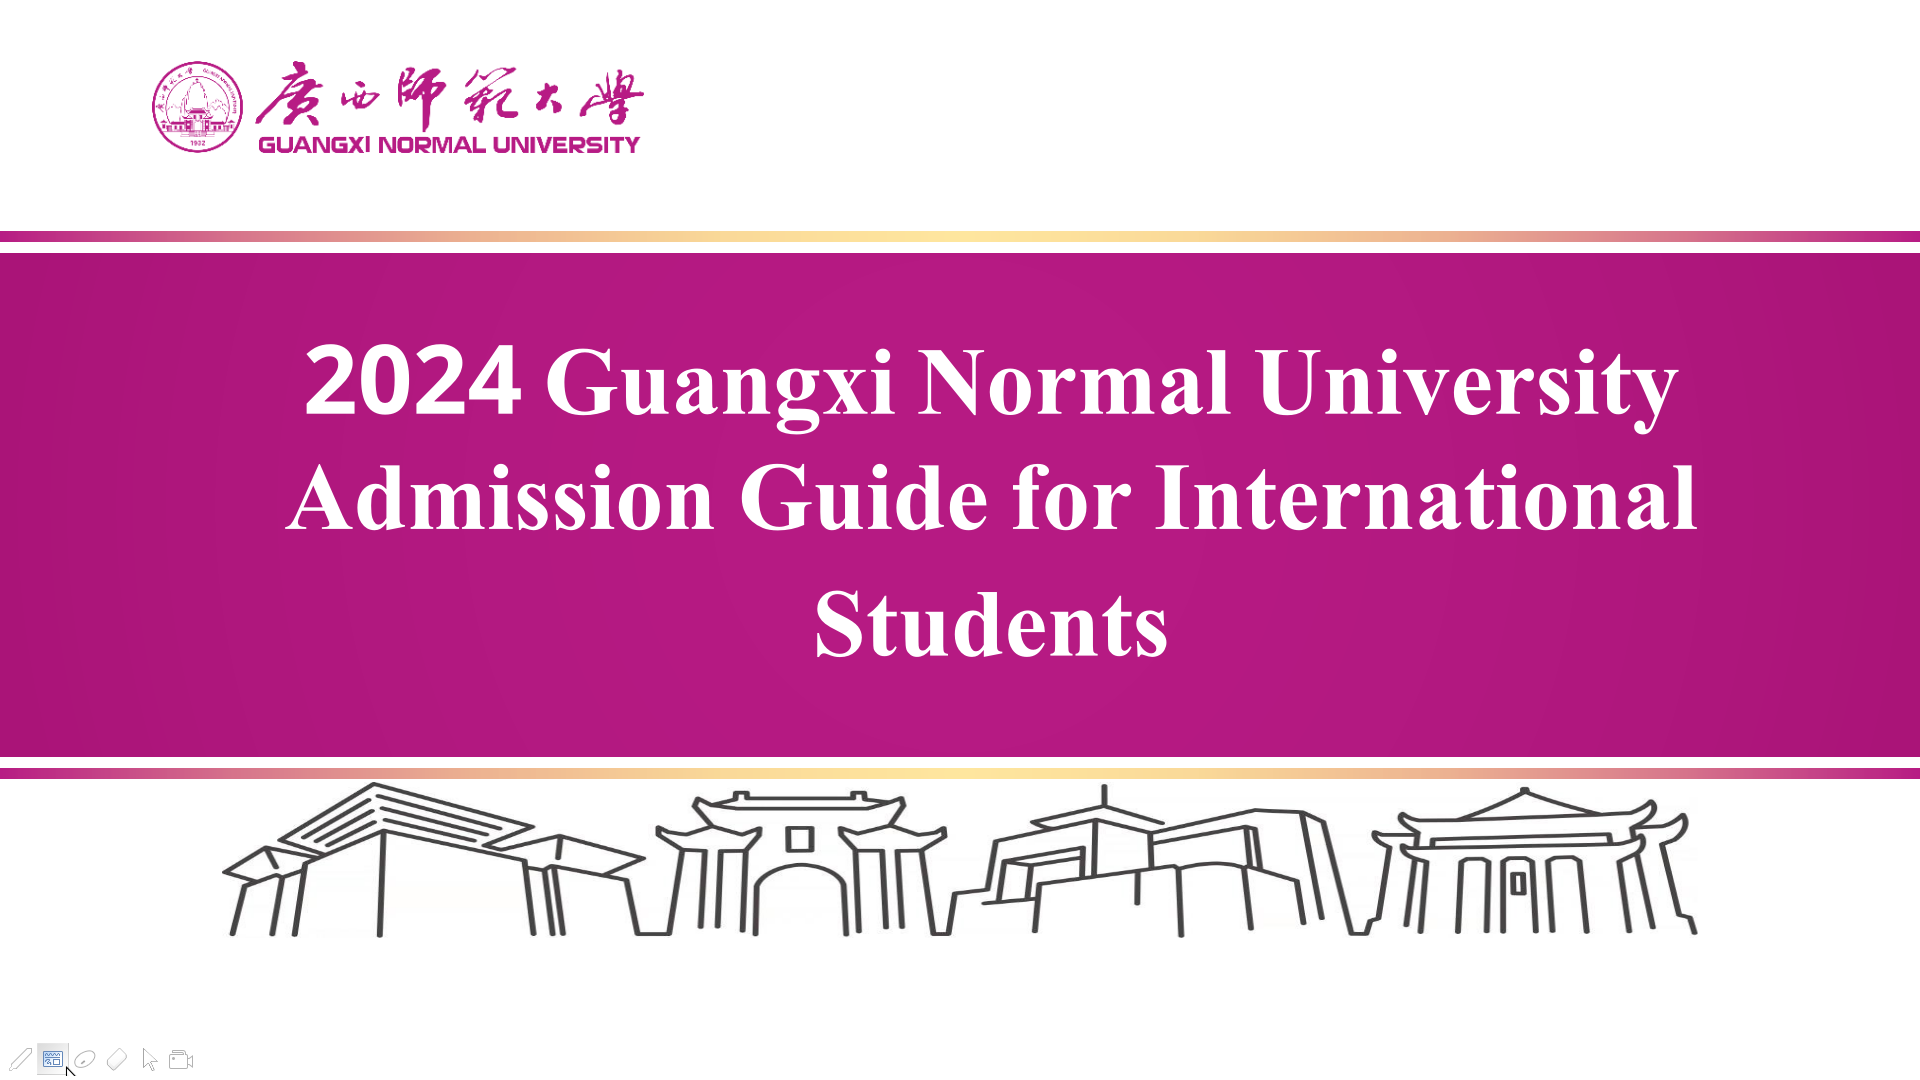 2024 Guangxi Normal University Admission Guide for International Students